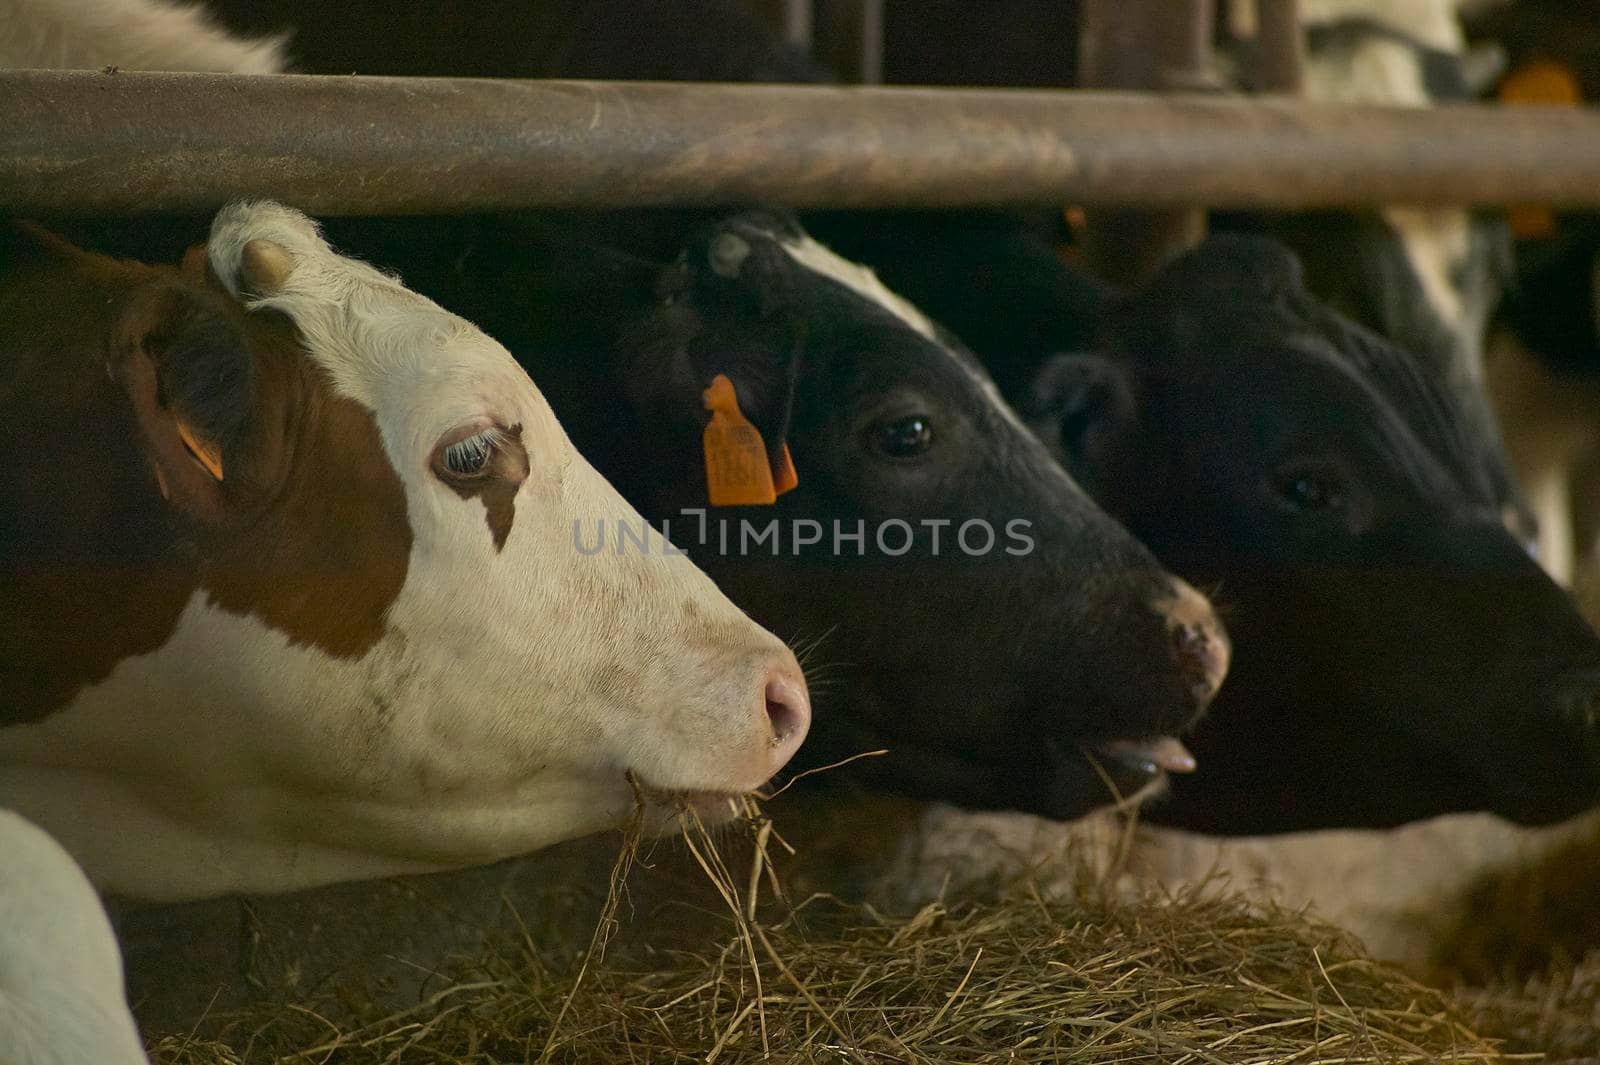 Cows in the herd 3 by pippocarlot